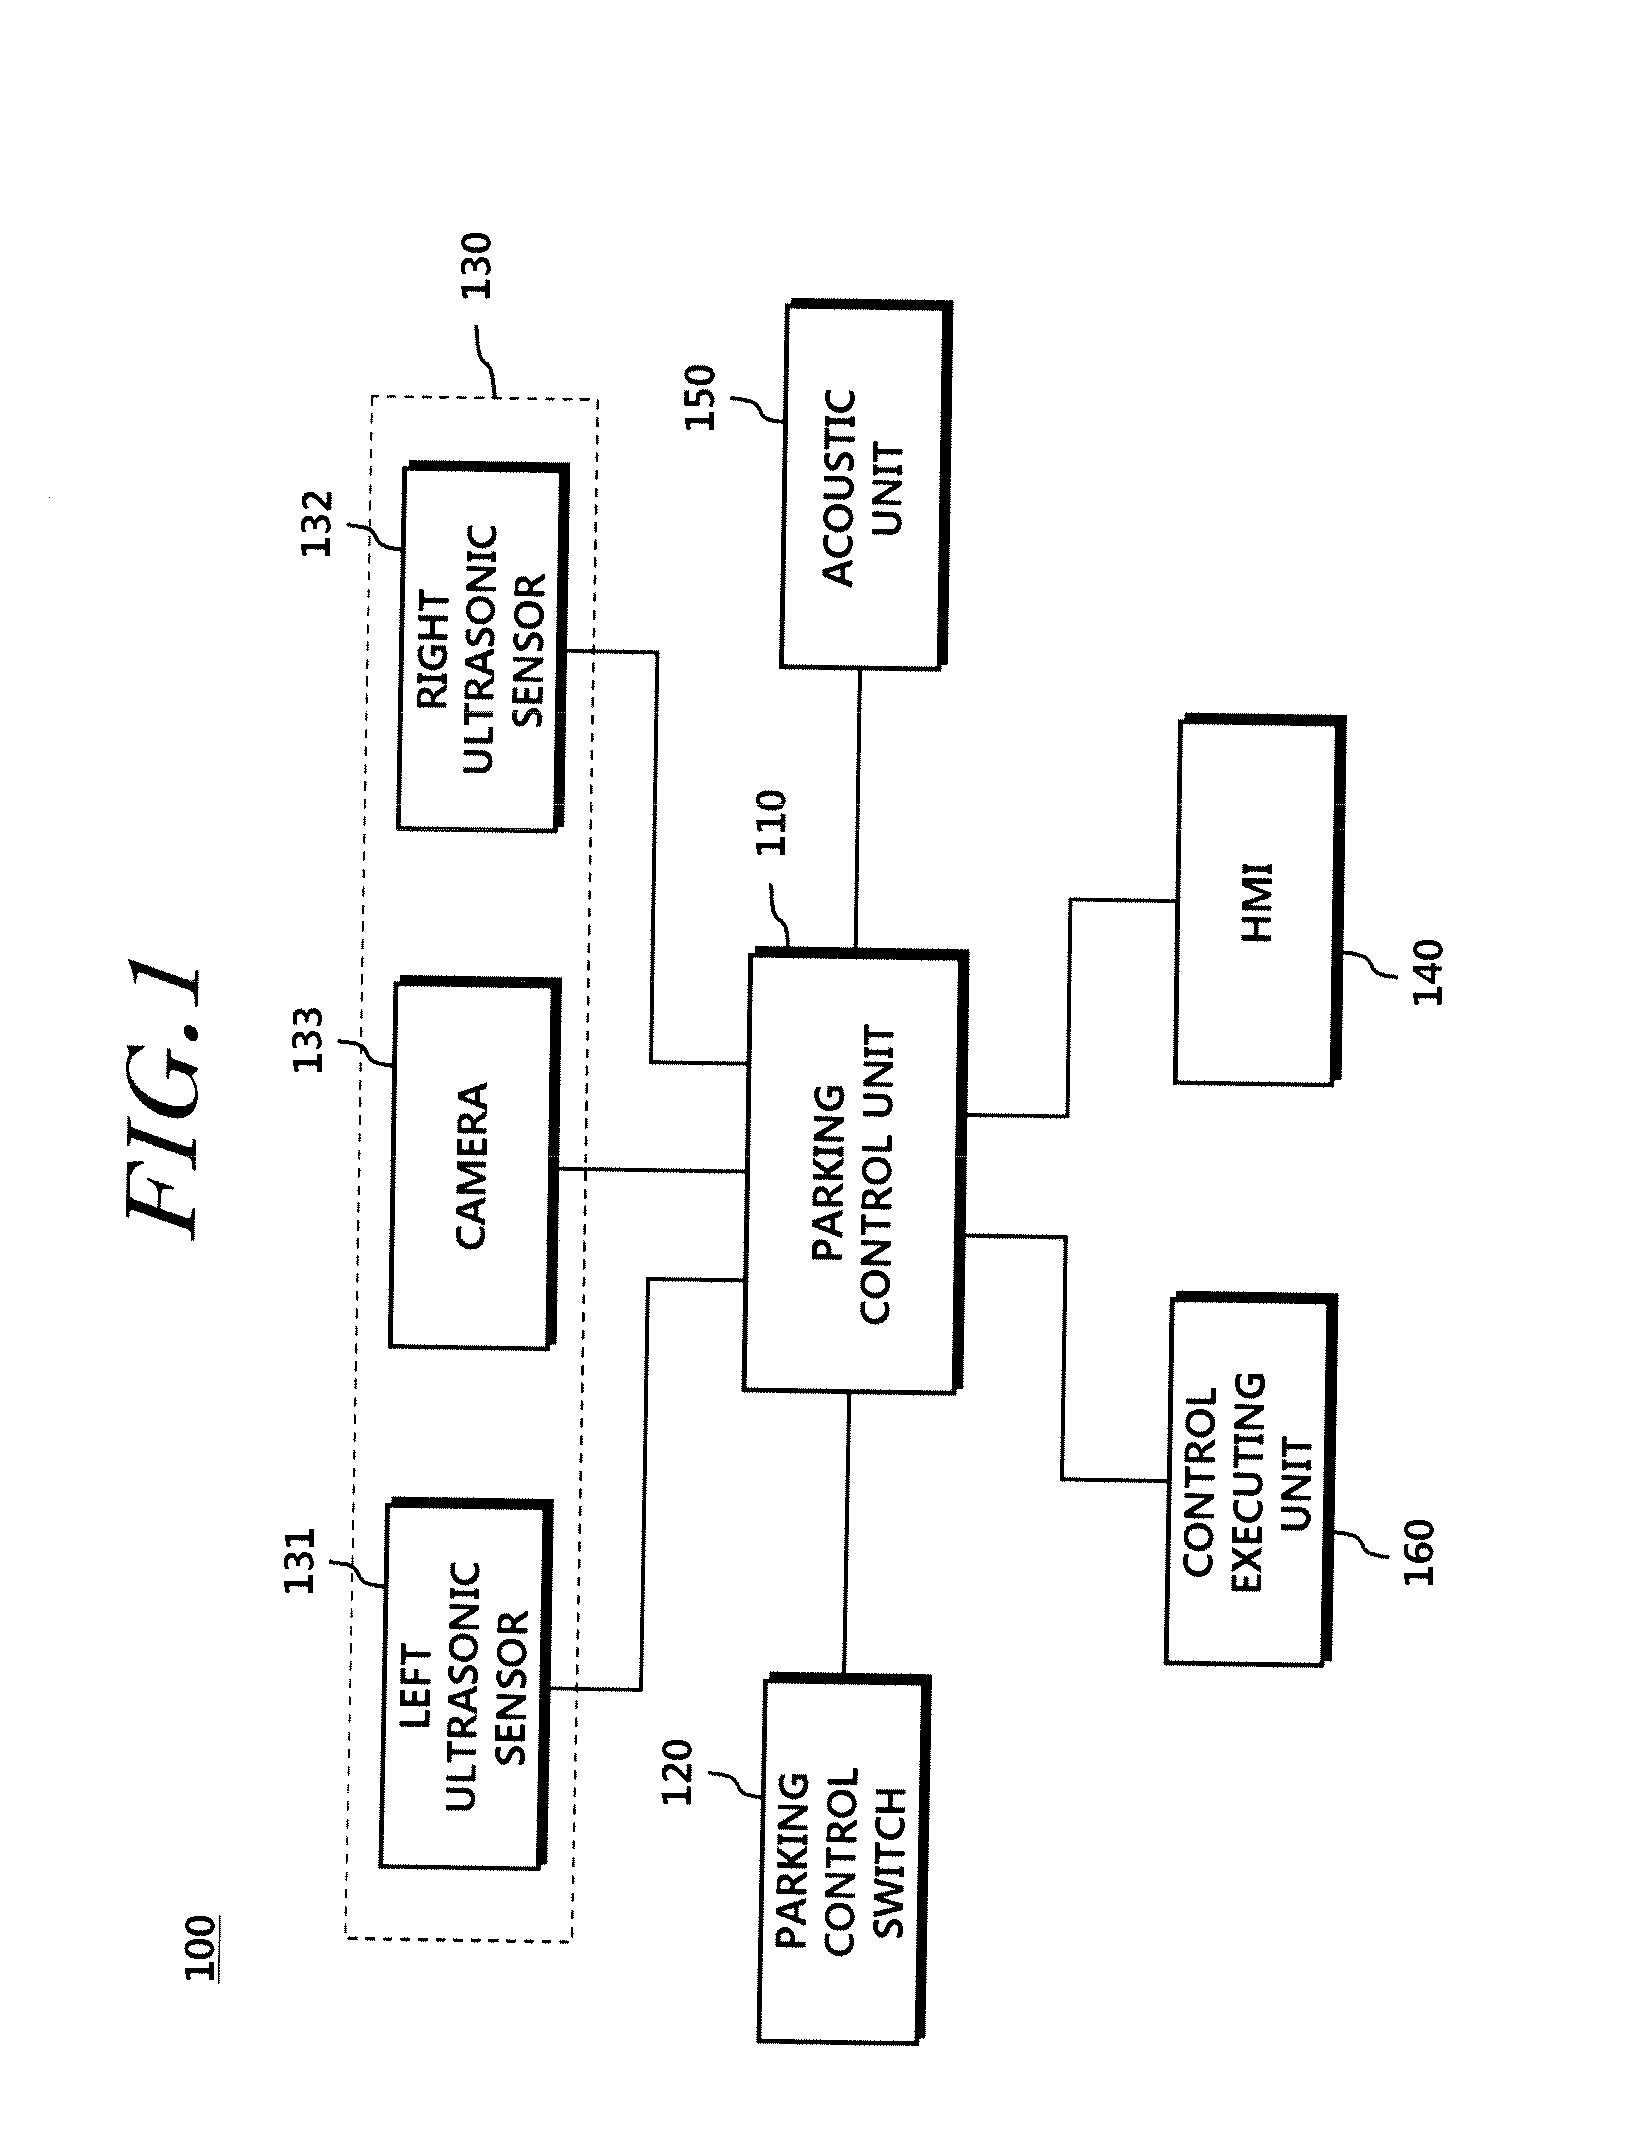 Method, apparatus, and system for parking control